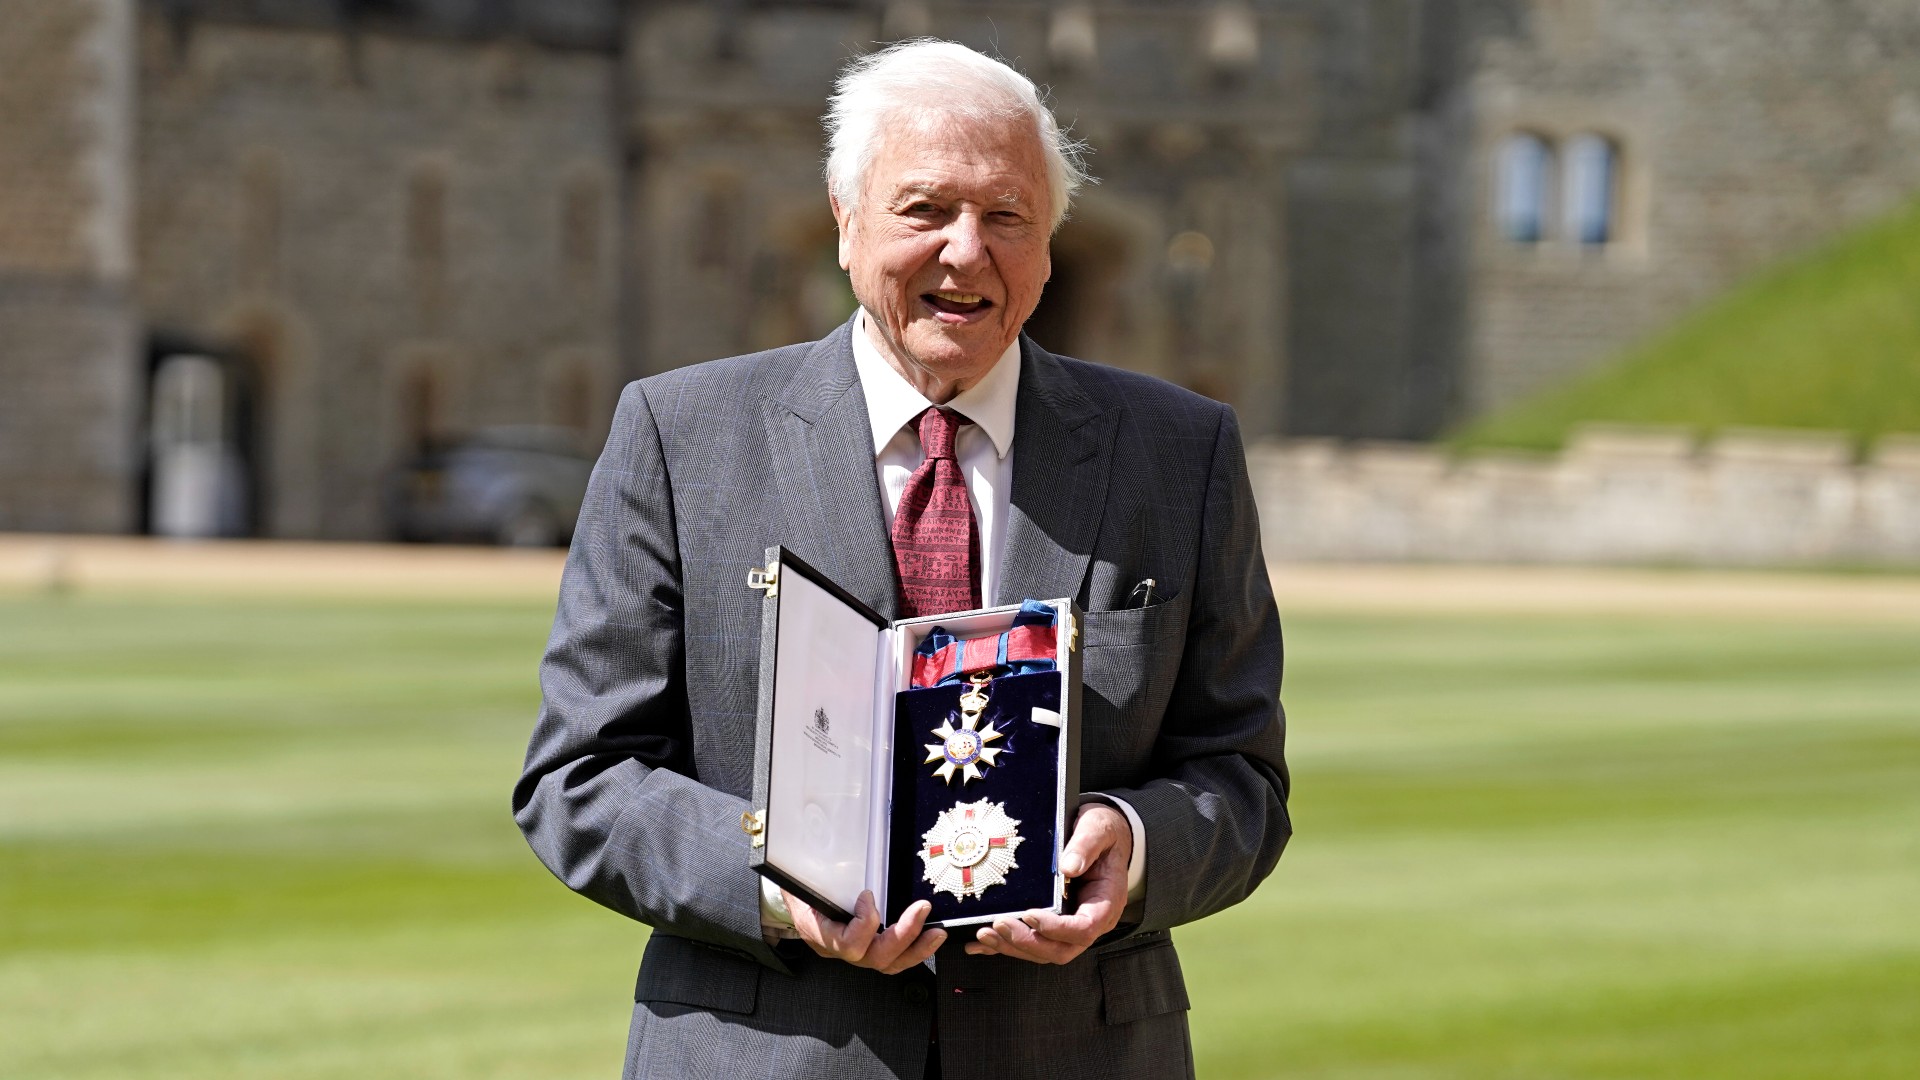 Sir David Attenborough Receives Second Knighthood in Windsor Castle Ceremony